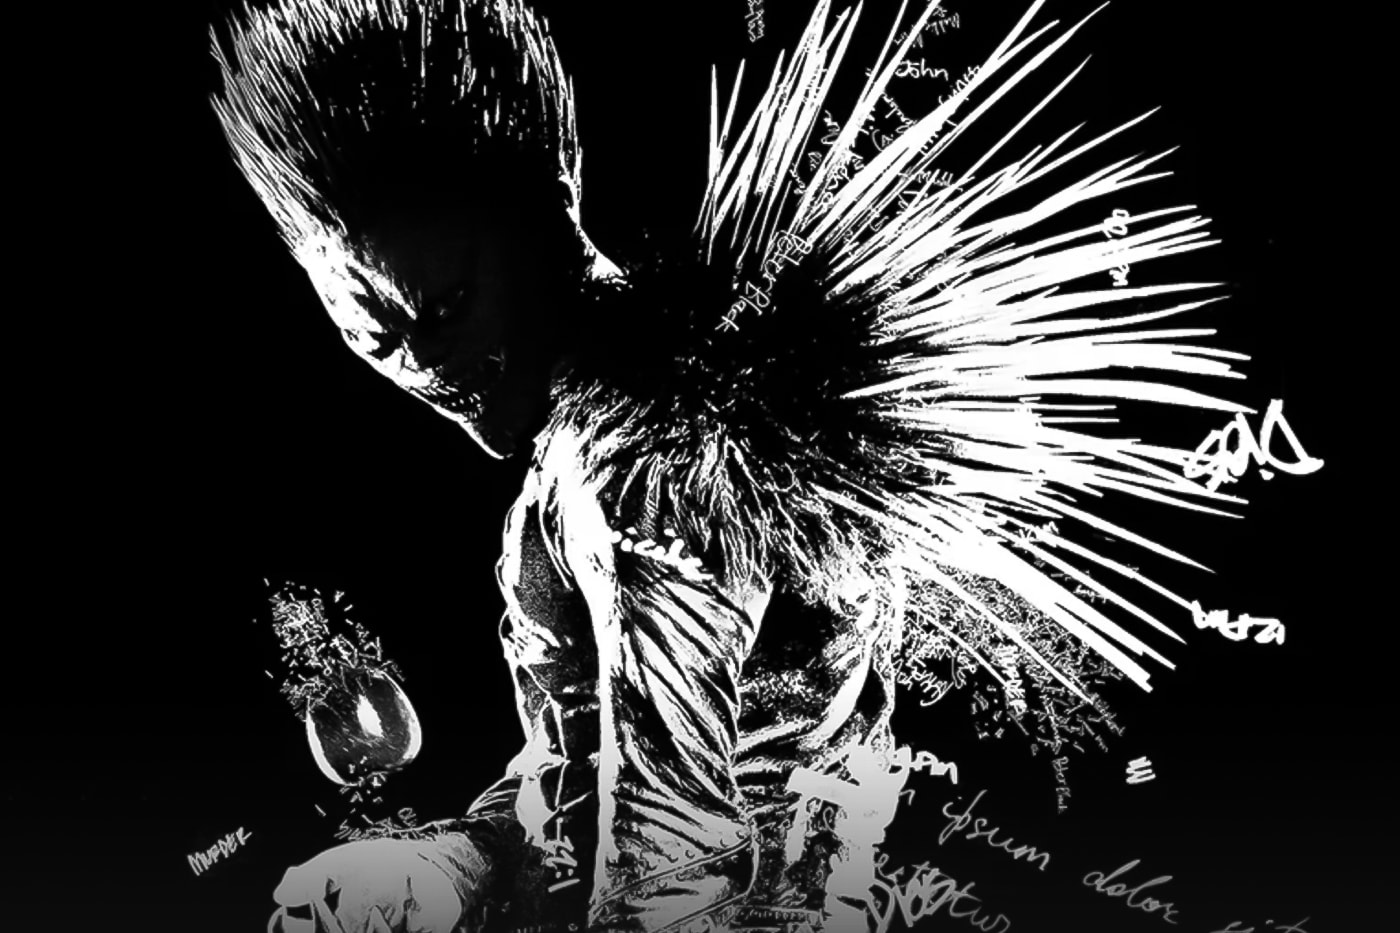 stranger things creators Duffer Brothers Developing Live-Action Death Note Series netflix